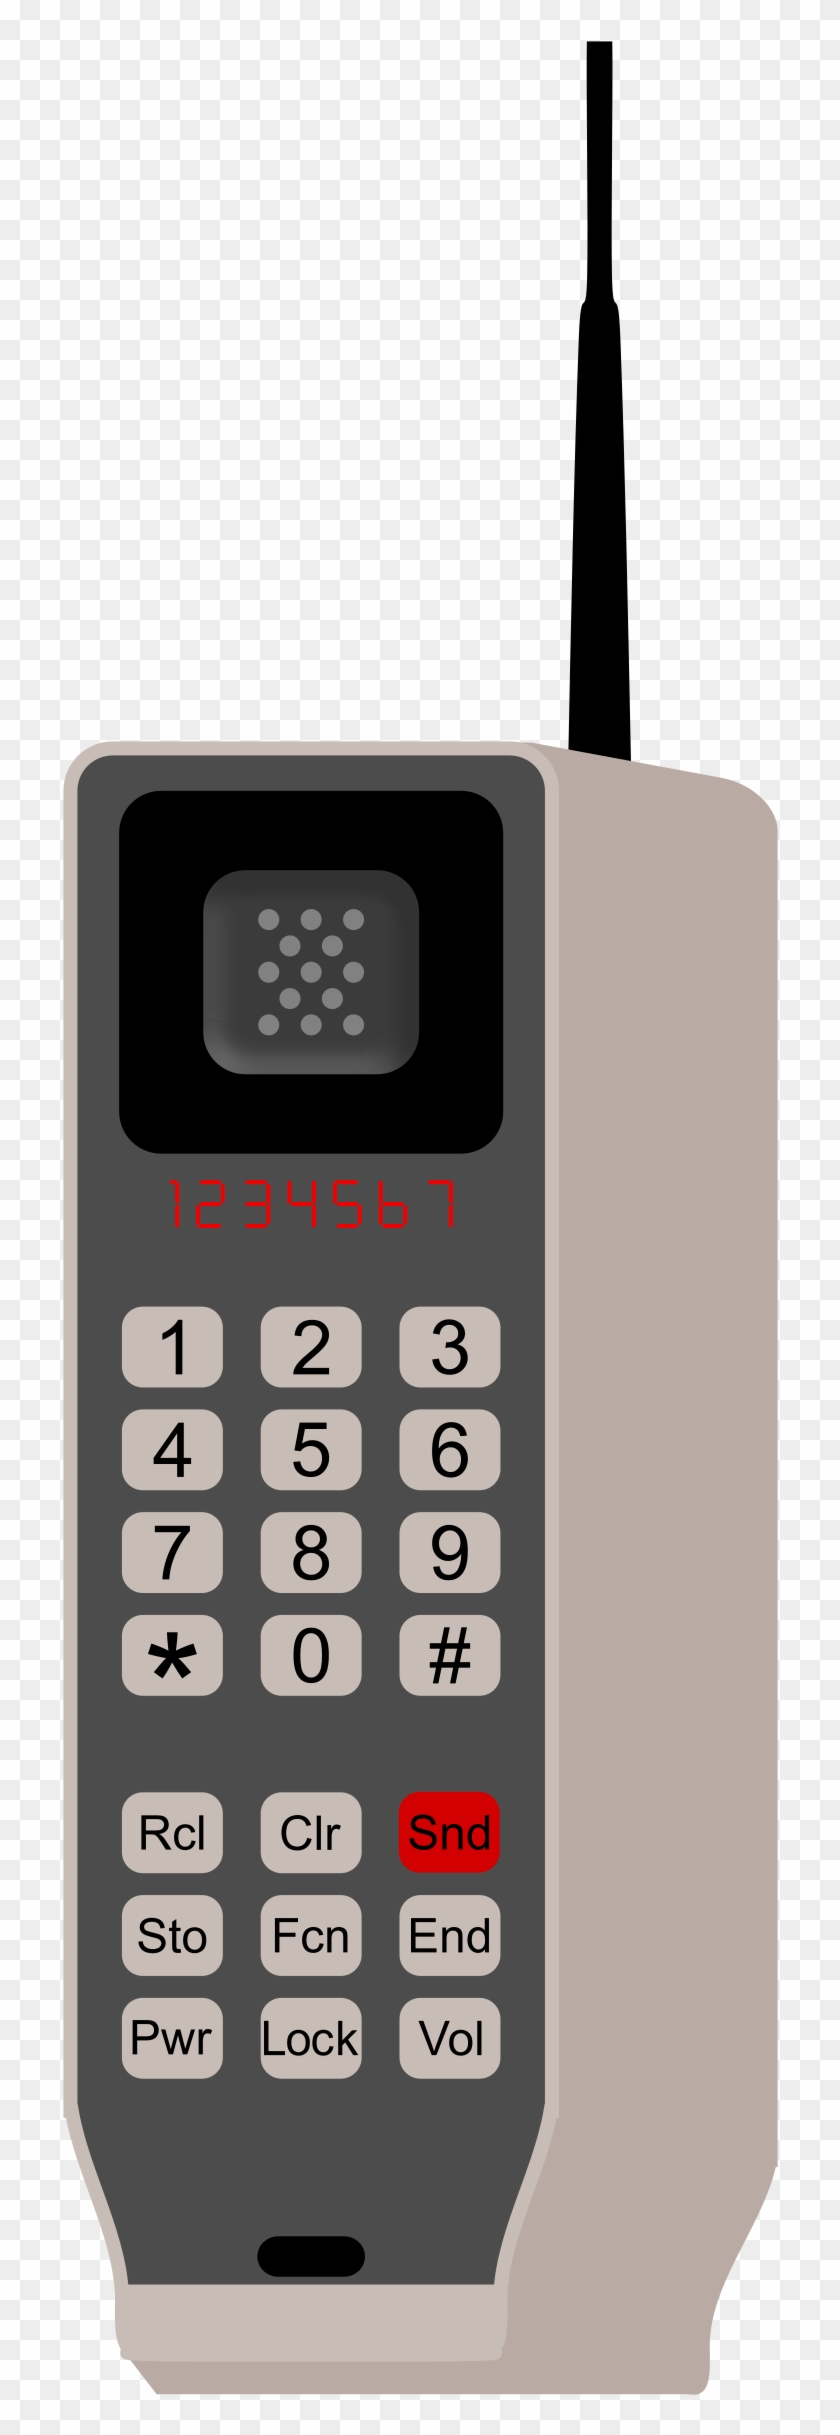 This Free Icons Png Design Of Brick Phone Clipart #200517